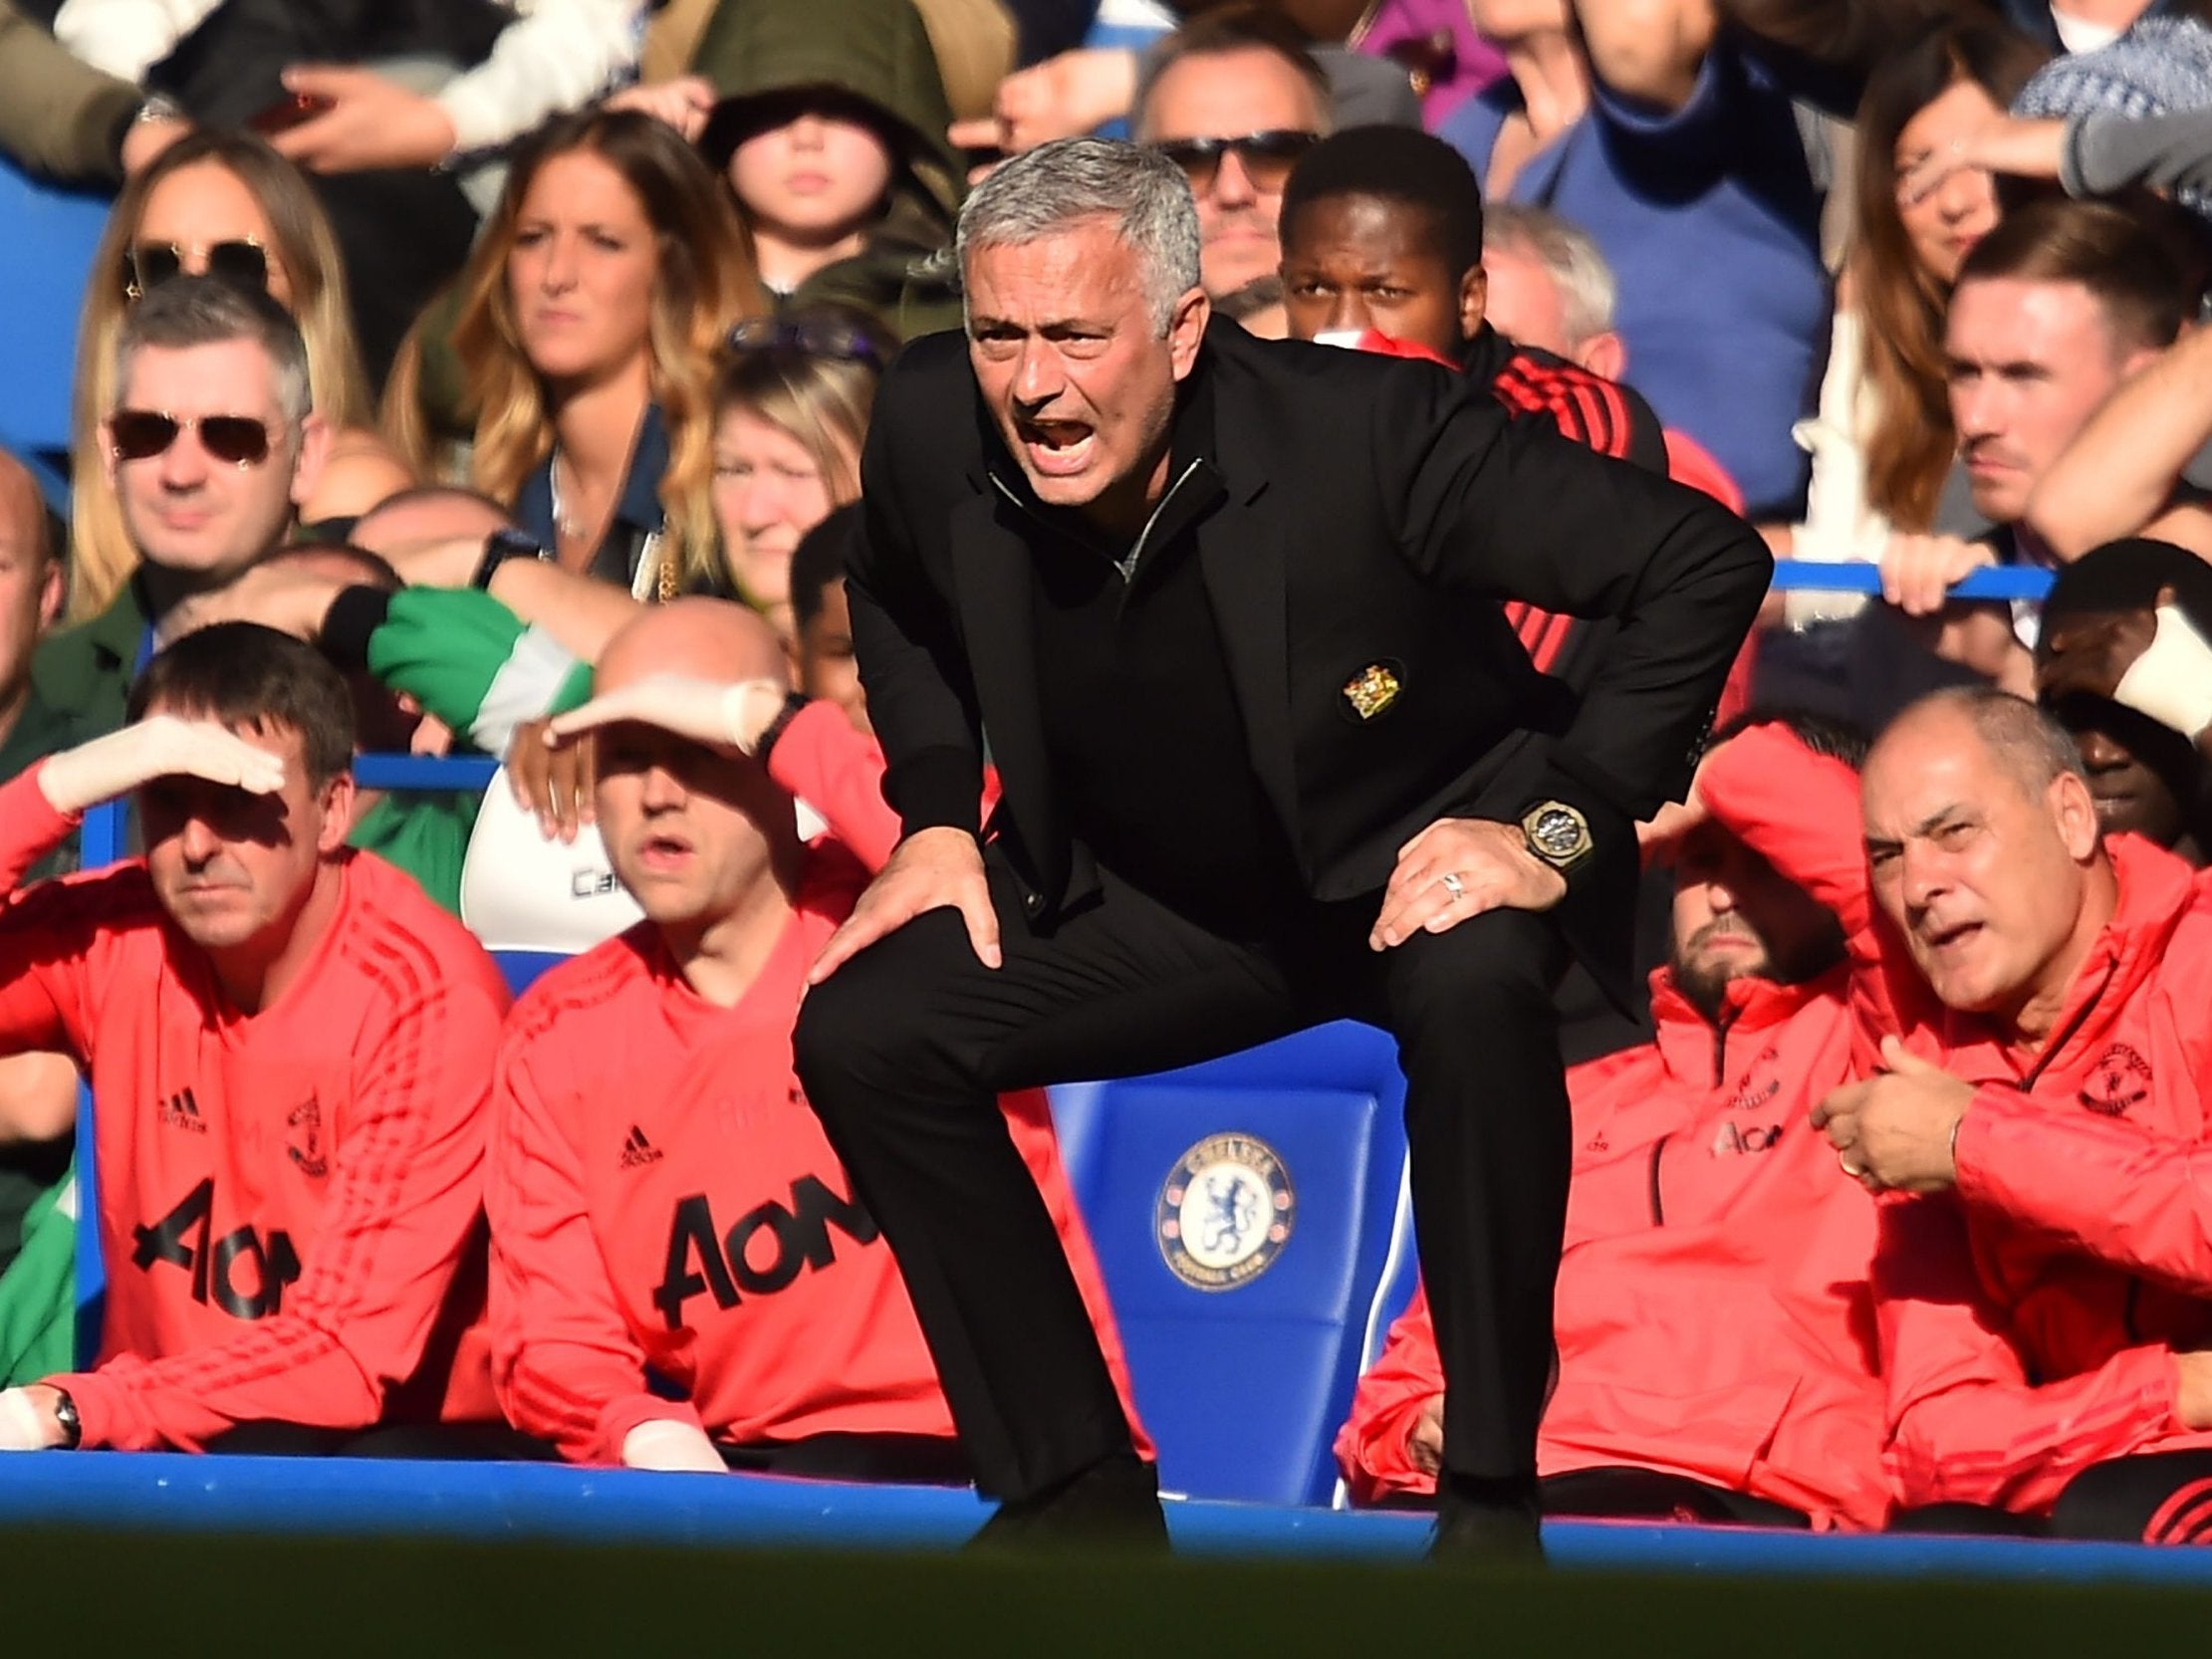 Chelsea vs Manchester United: Why it's time for Jose Mourinho to finally embrace the chaos